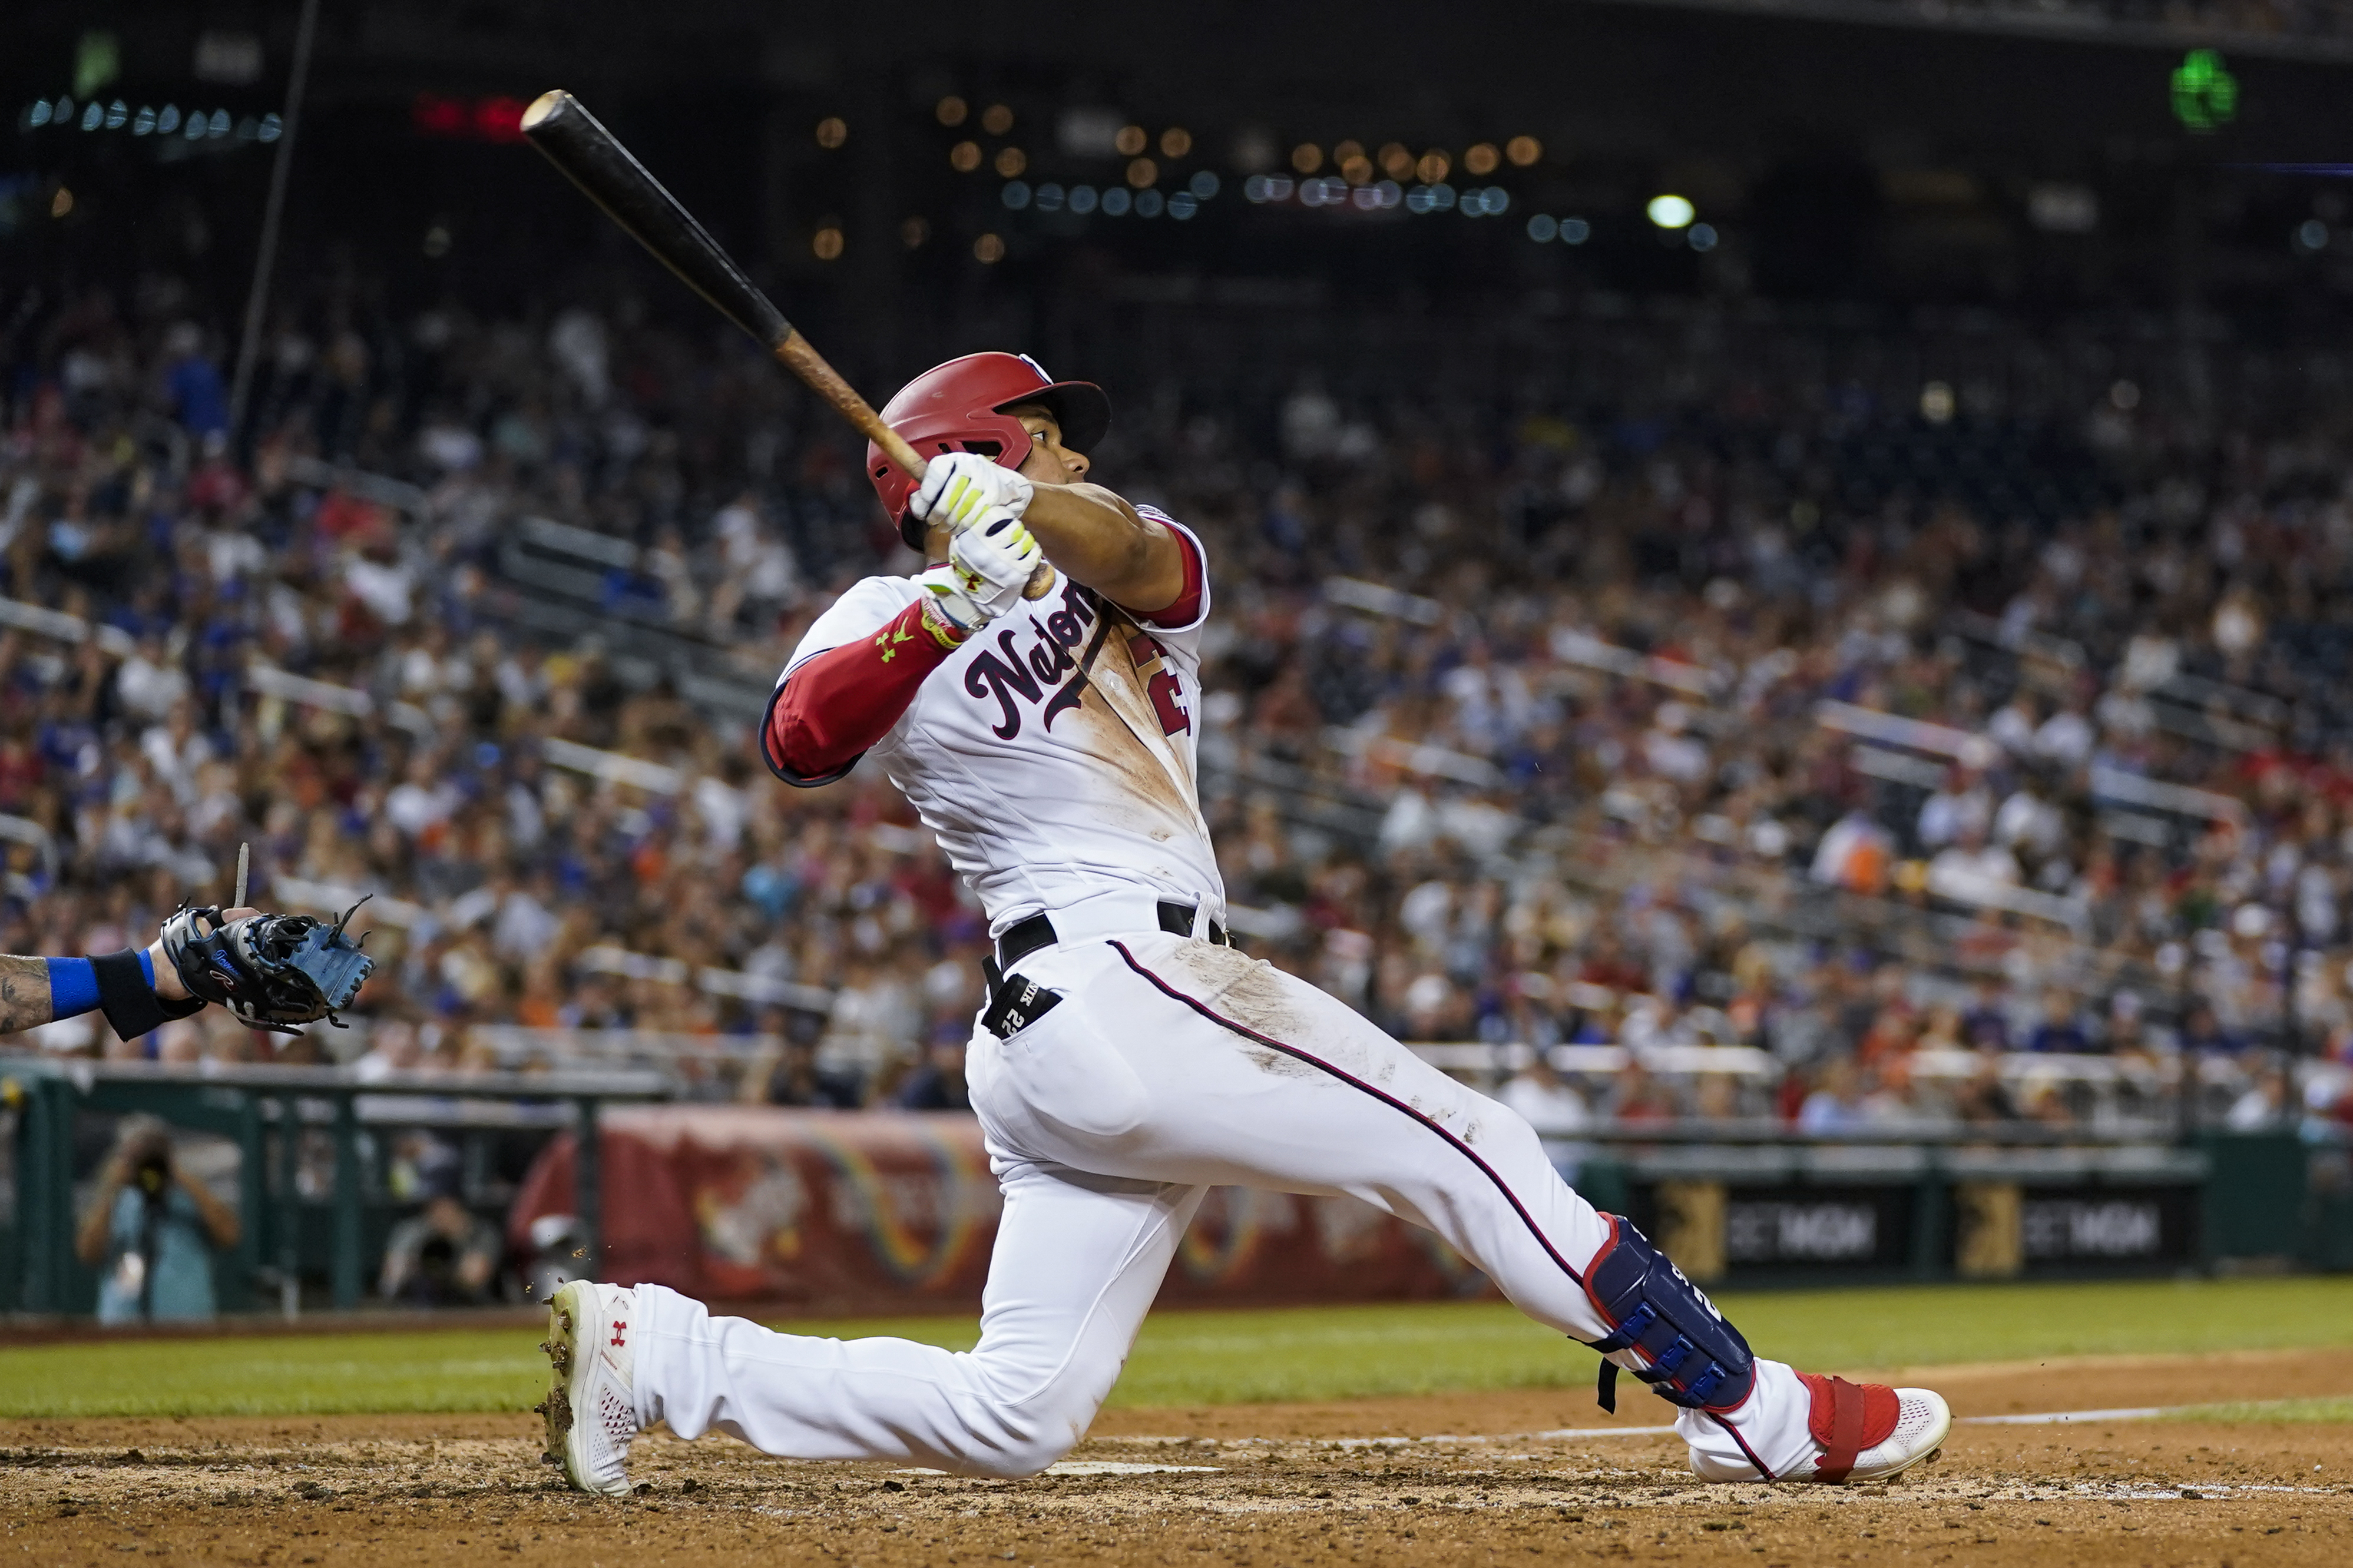 San Diego Padres land Juan Soto in blockbuster trade with